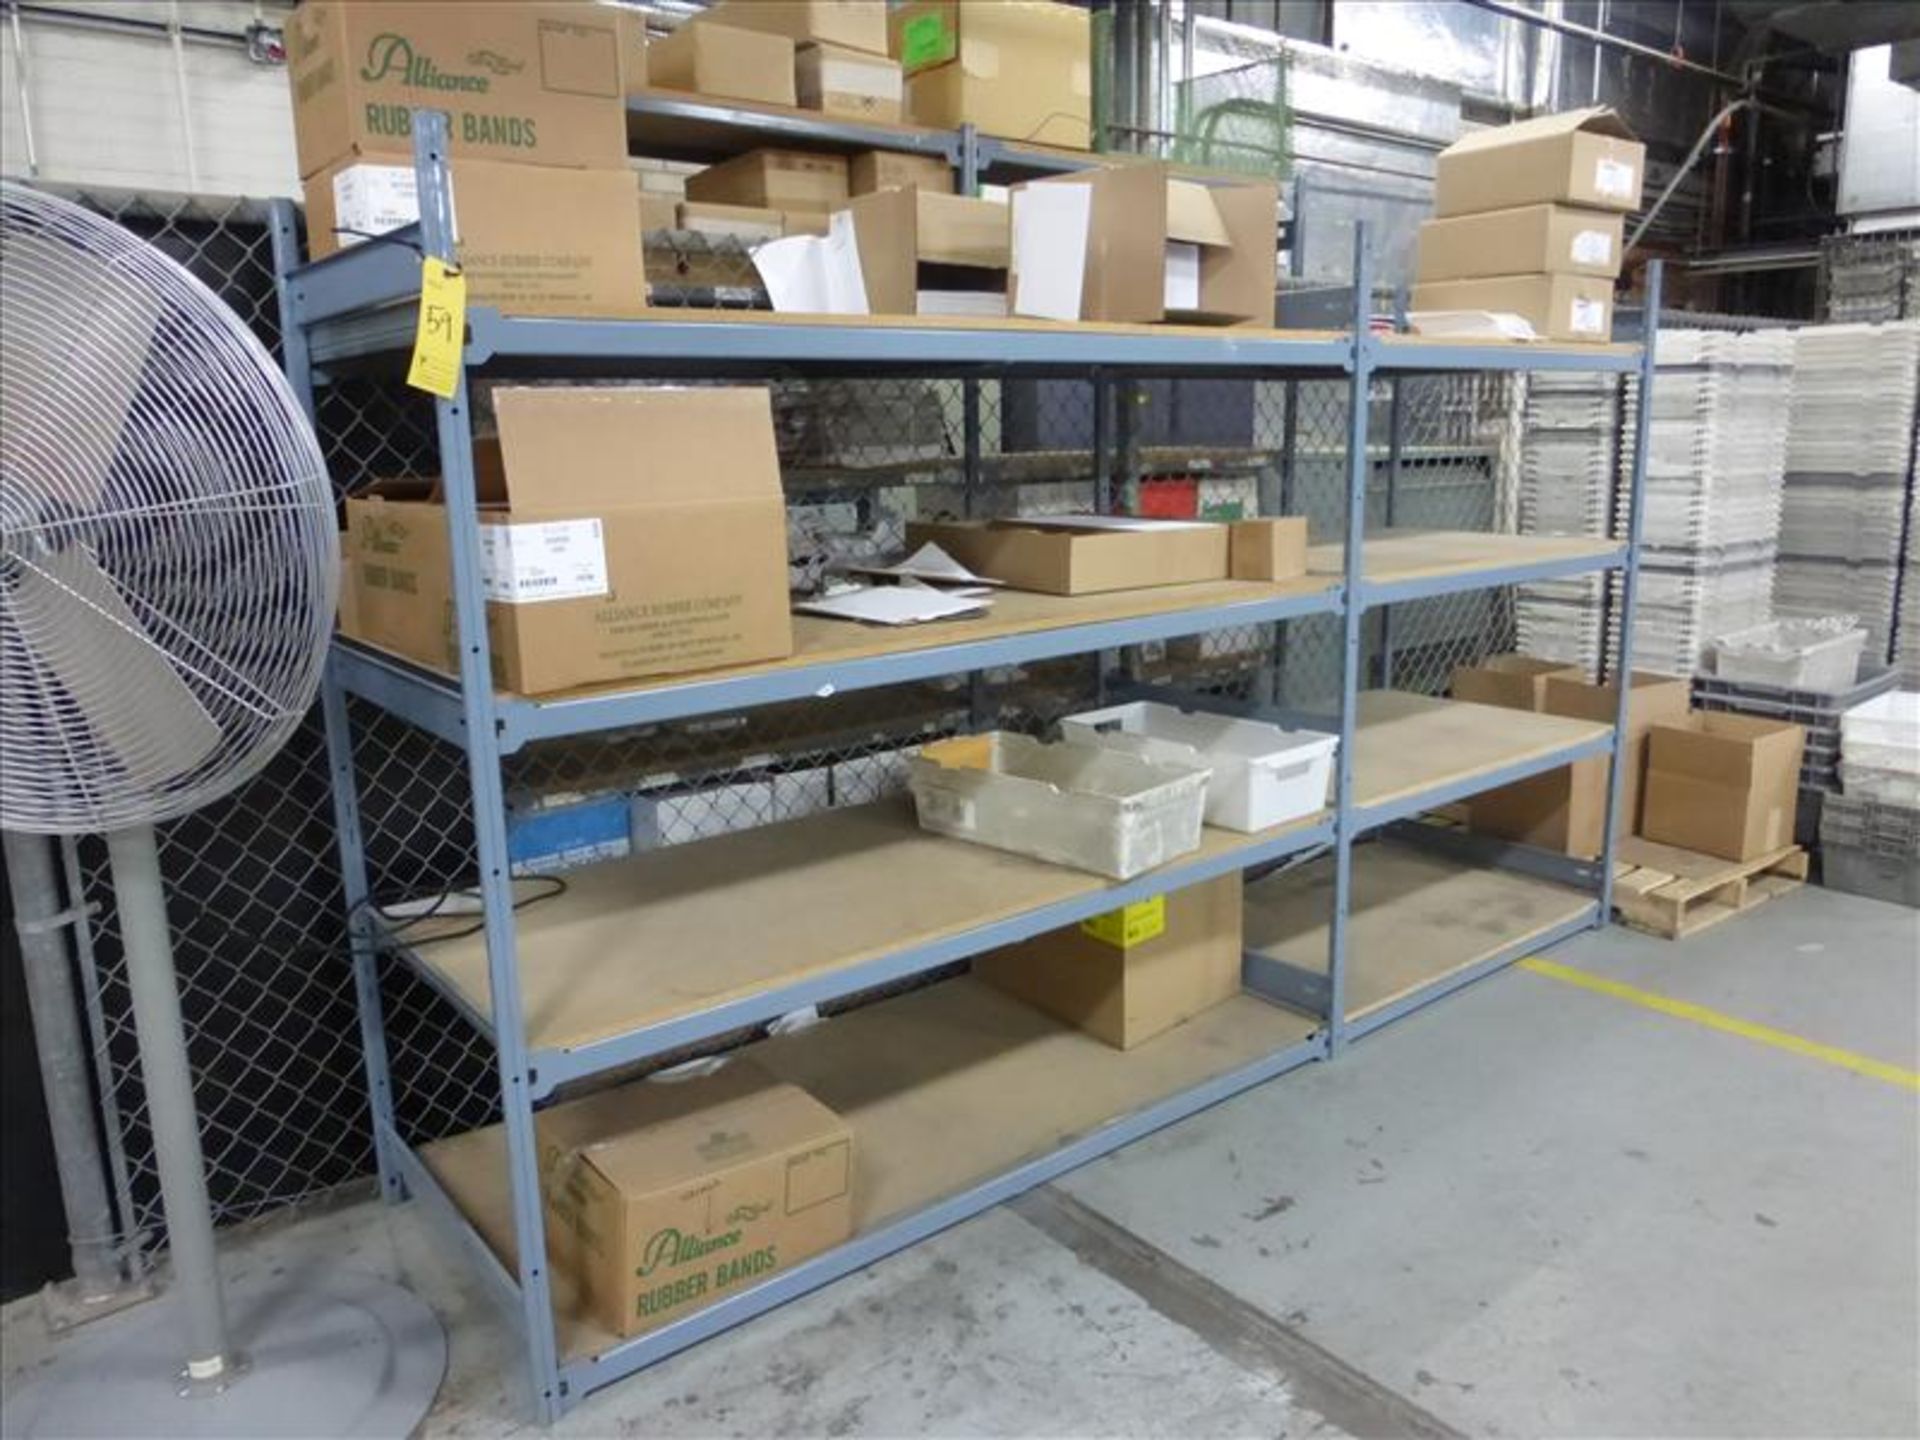 (8) Sections of Dexion shelving, (7) 4 ft. x 30 in. / (1) 6 ft. x 30 in.